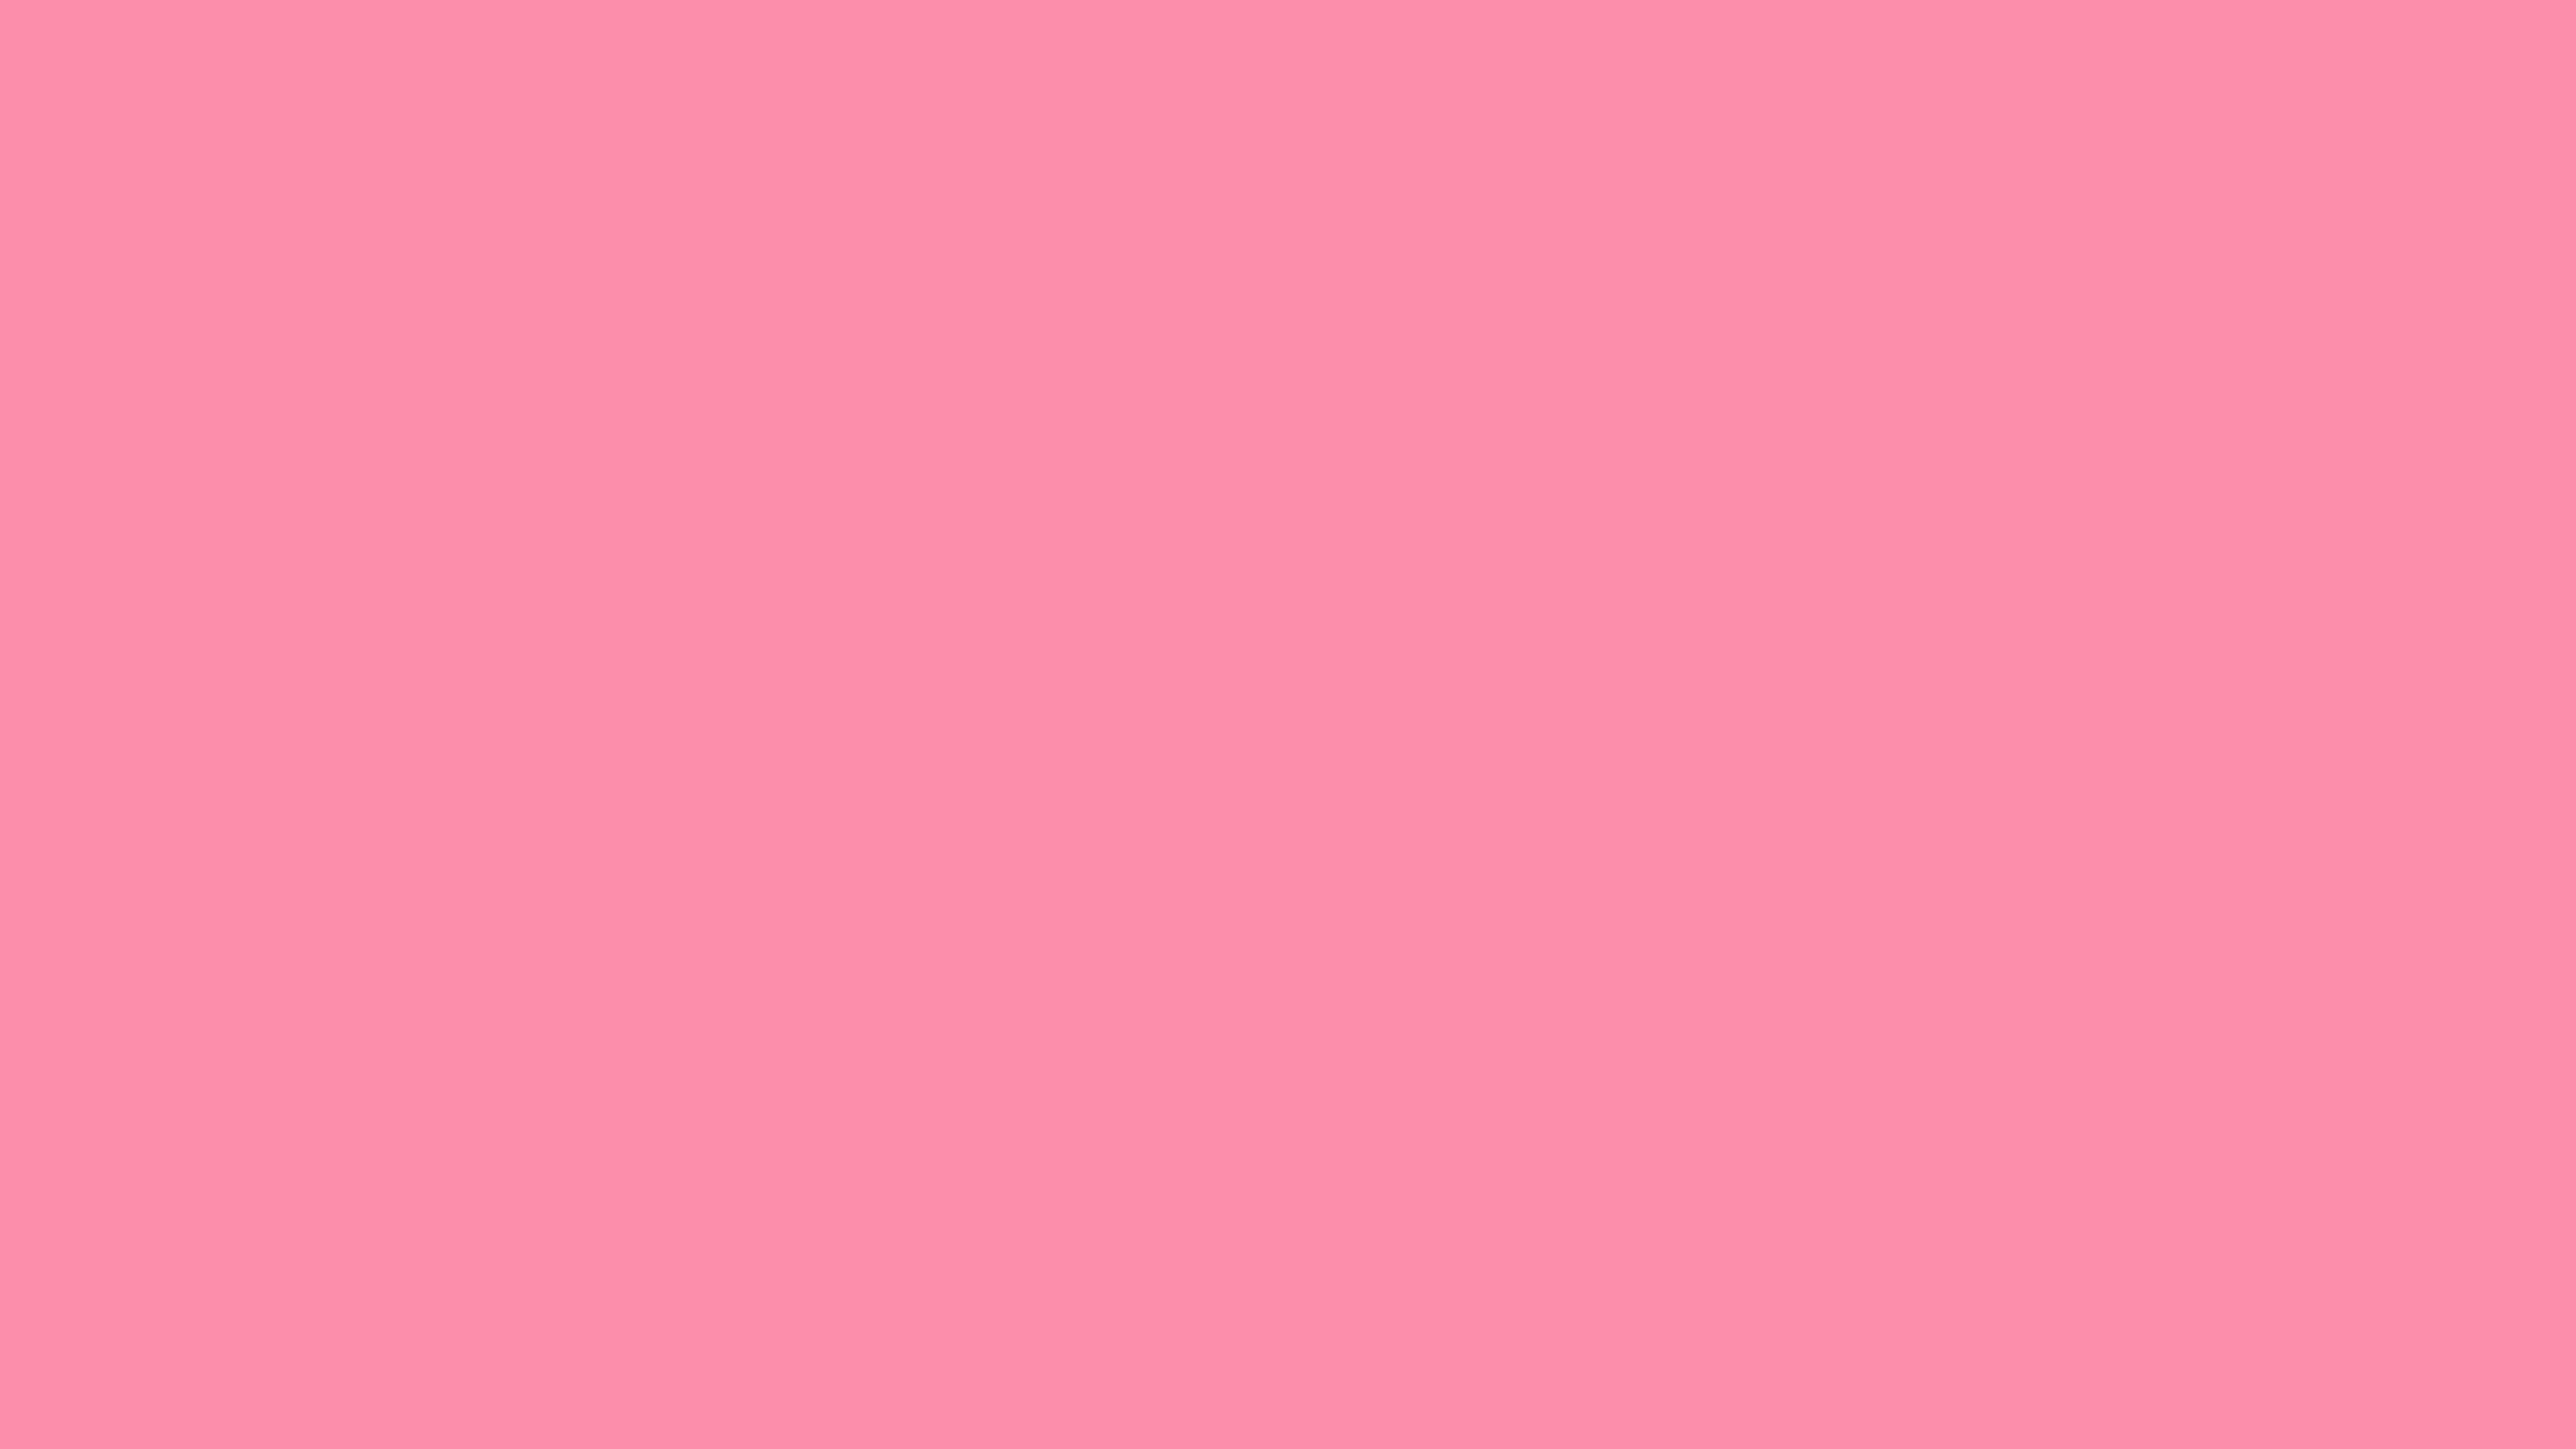 7680x4320 Flamingo Pink Solid Color Background